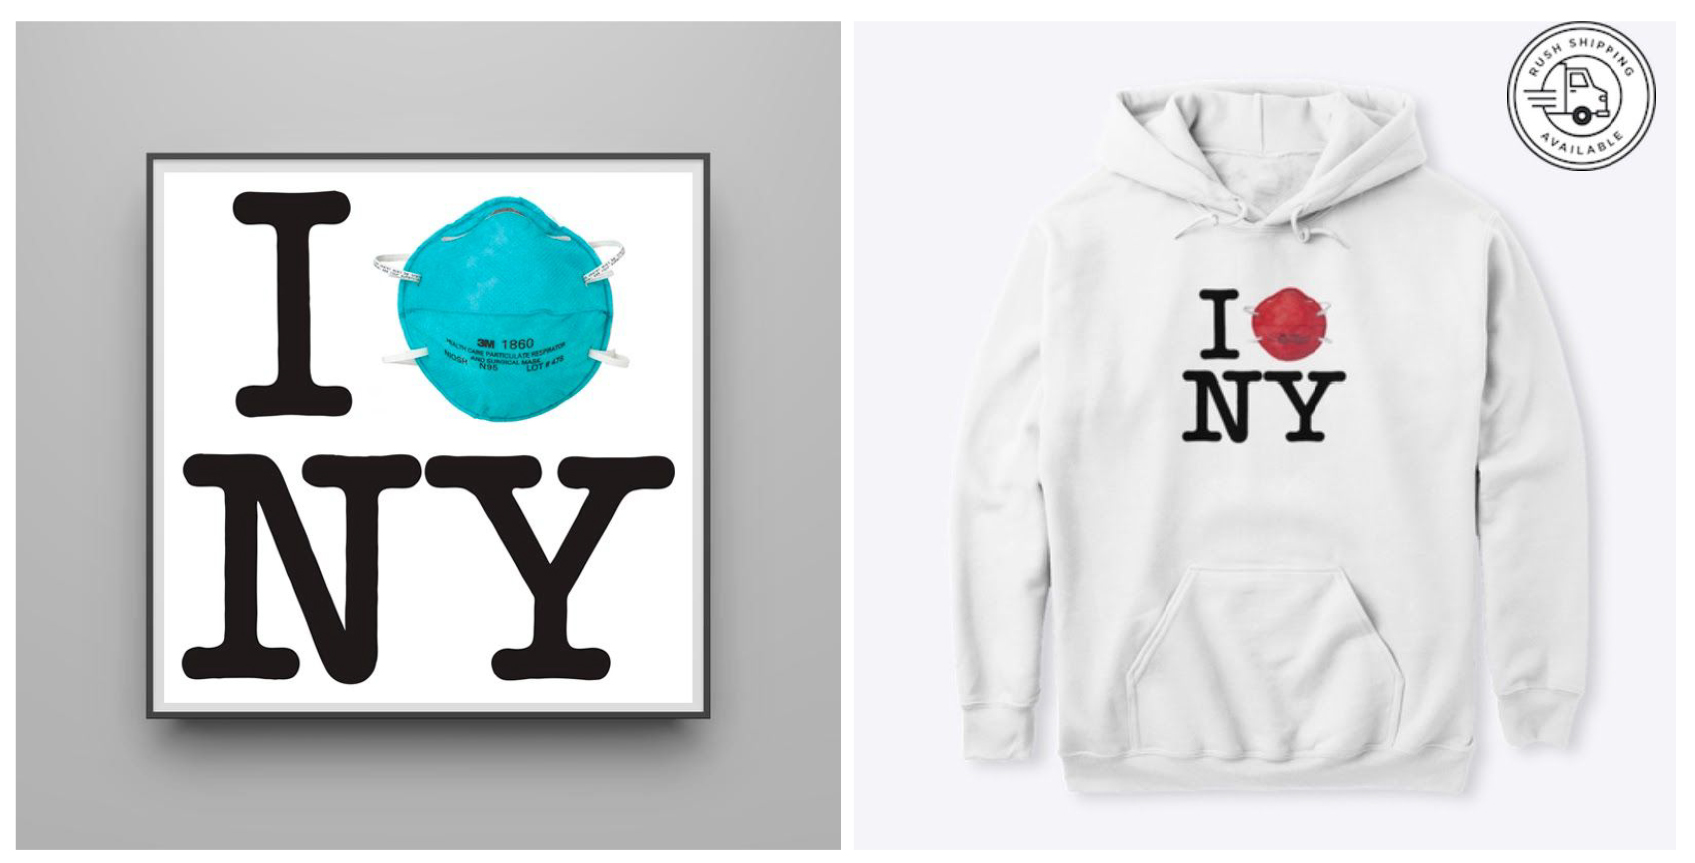 “I Protect NY” Design Effort to Help Frontline NYC Health Workers